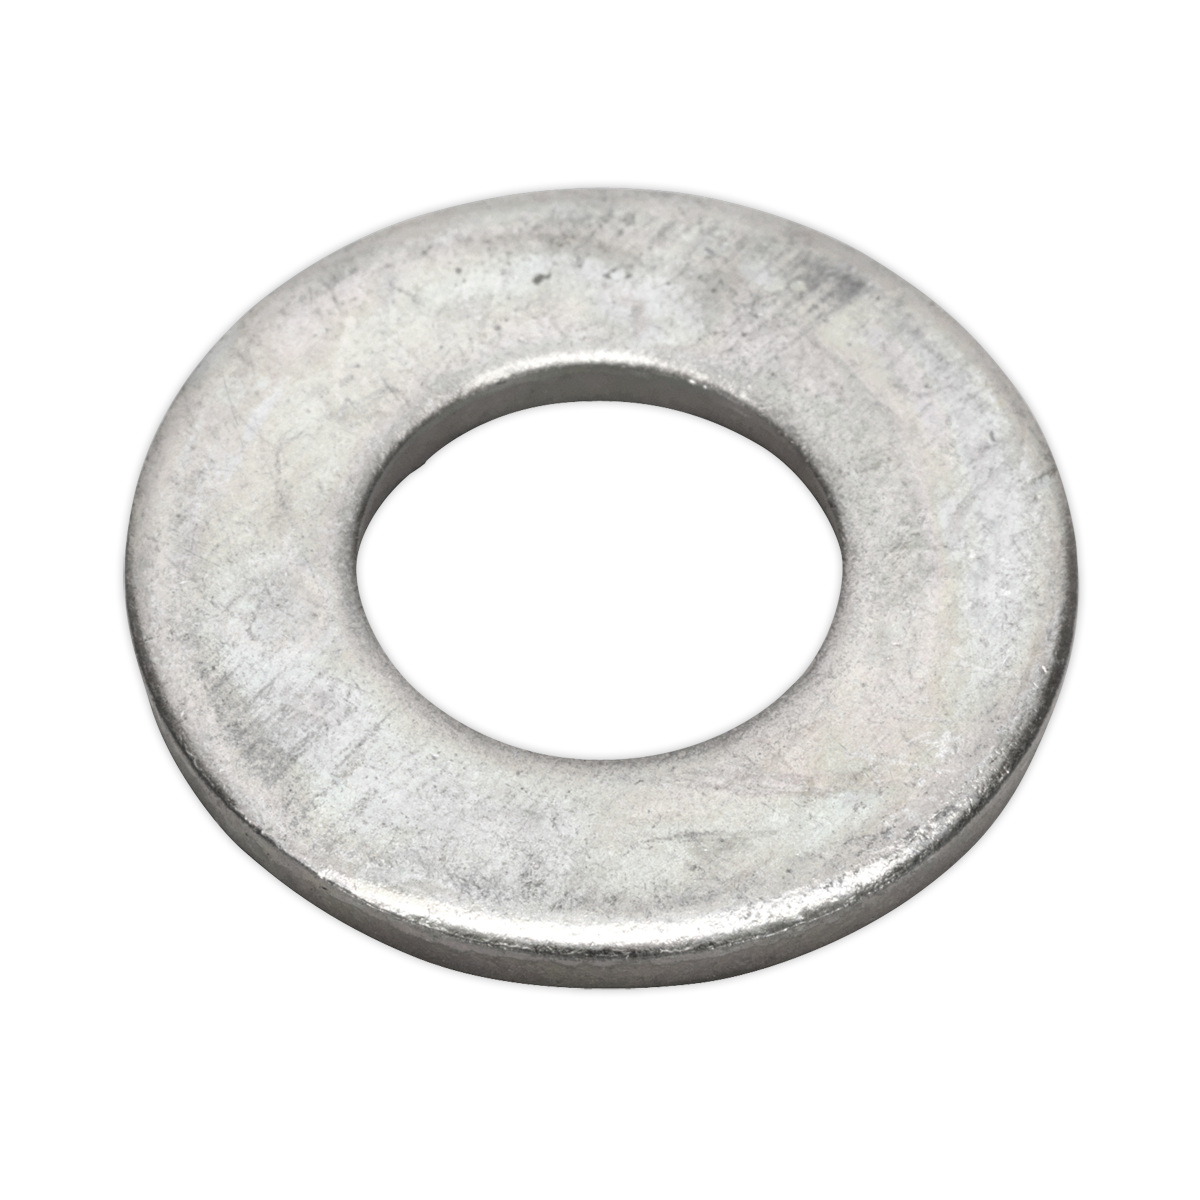 Flat Washer M12 x 28mm Form C Pack of 100 - FWC1228 - Farming Parts